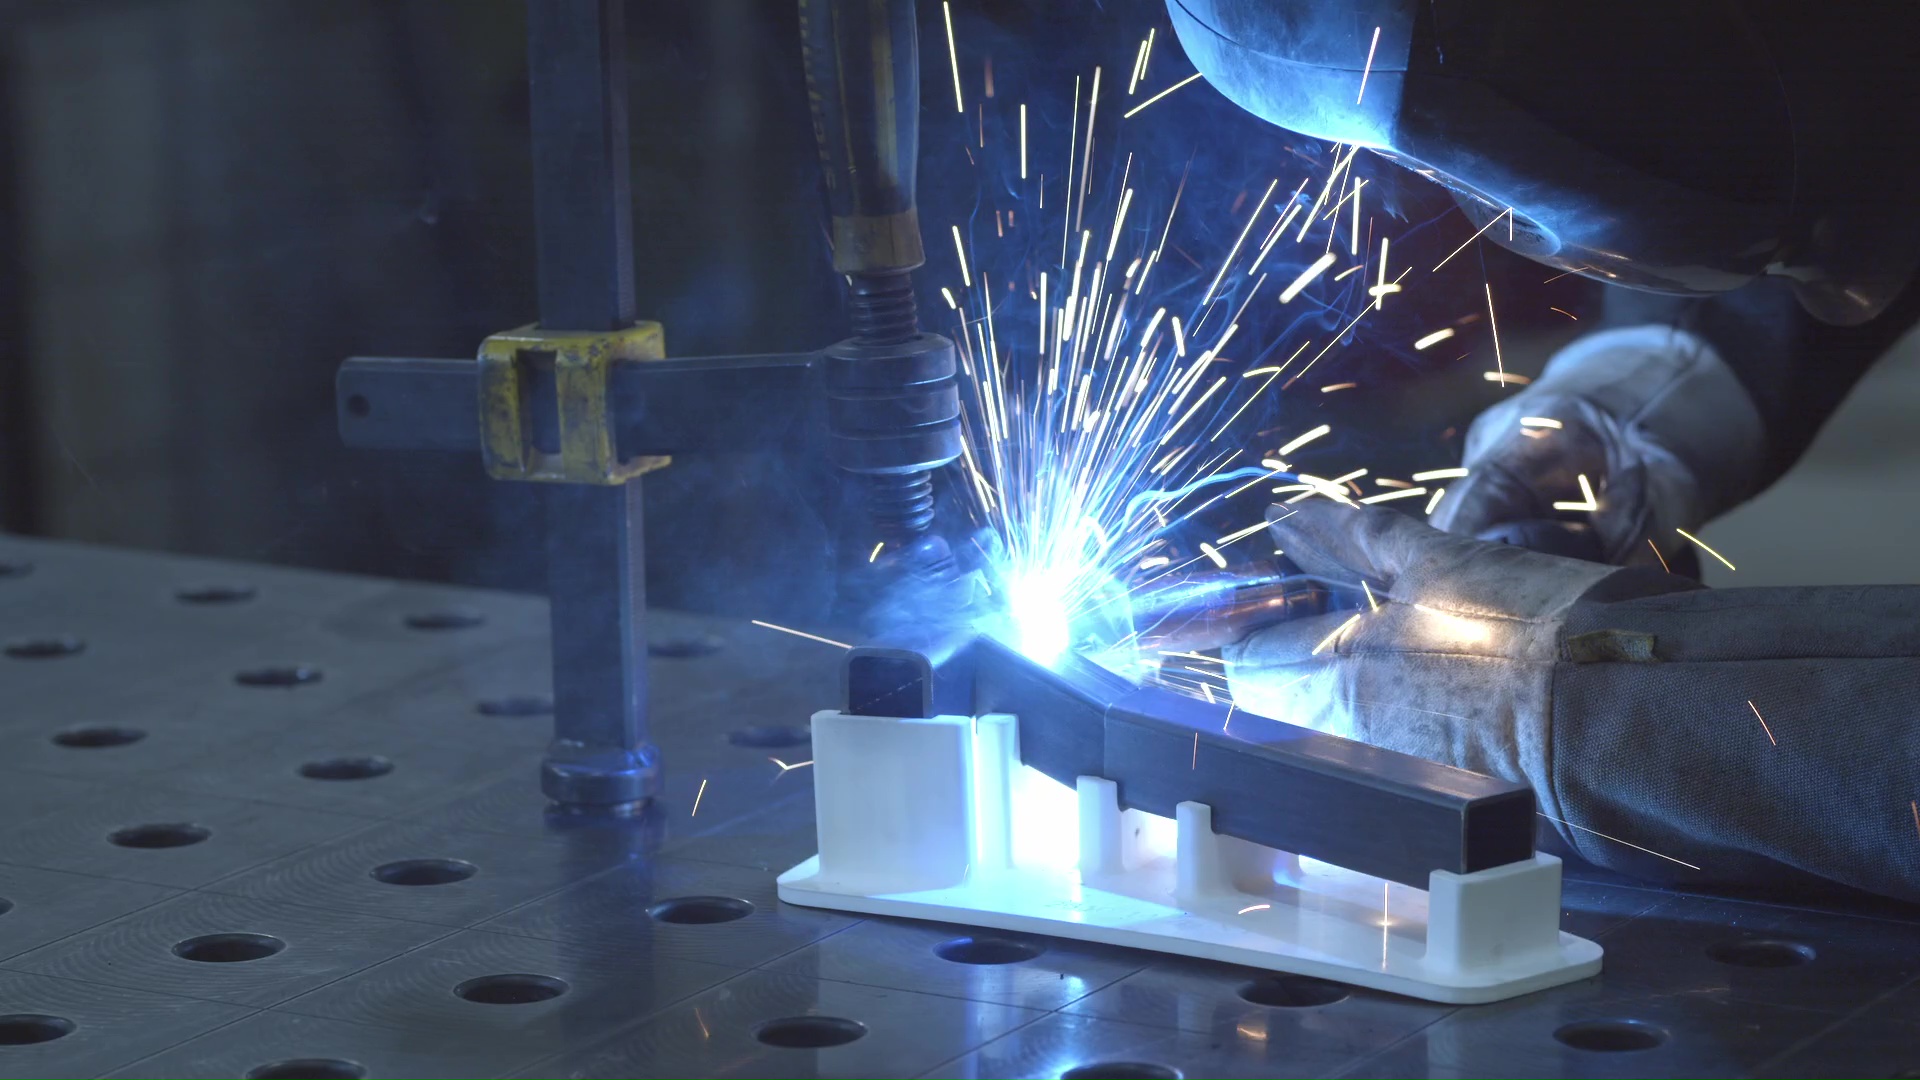 A 3D printed welding fixture to securely hold parts during welding operations